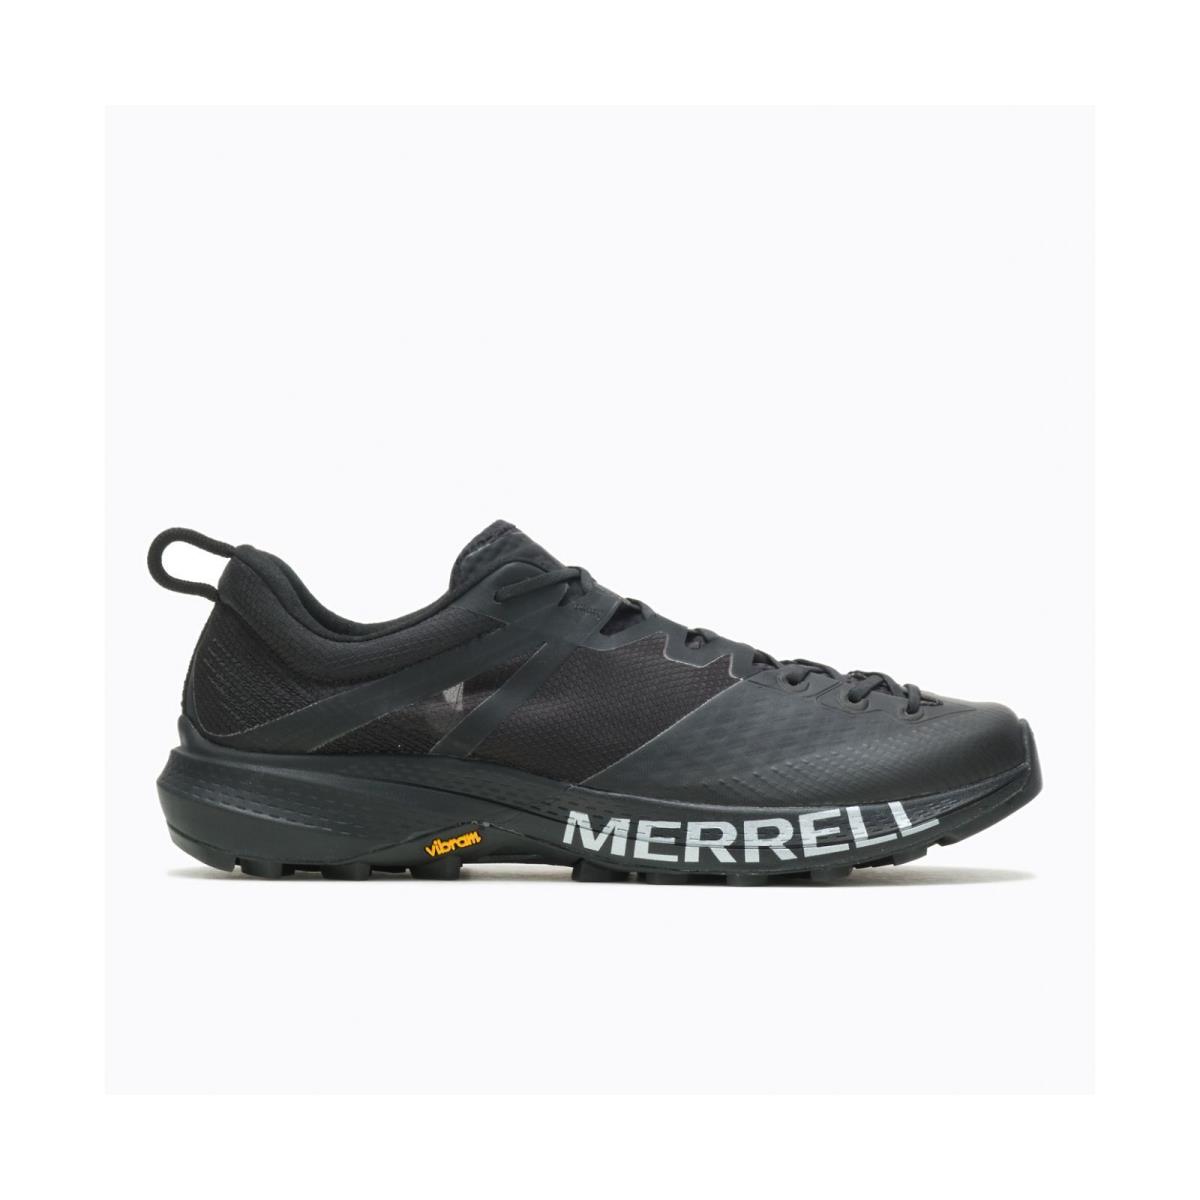 Merrell Lightweight Breathable Comfort Men`s Shoes Rubber Outsole Limited Editn Black